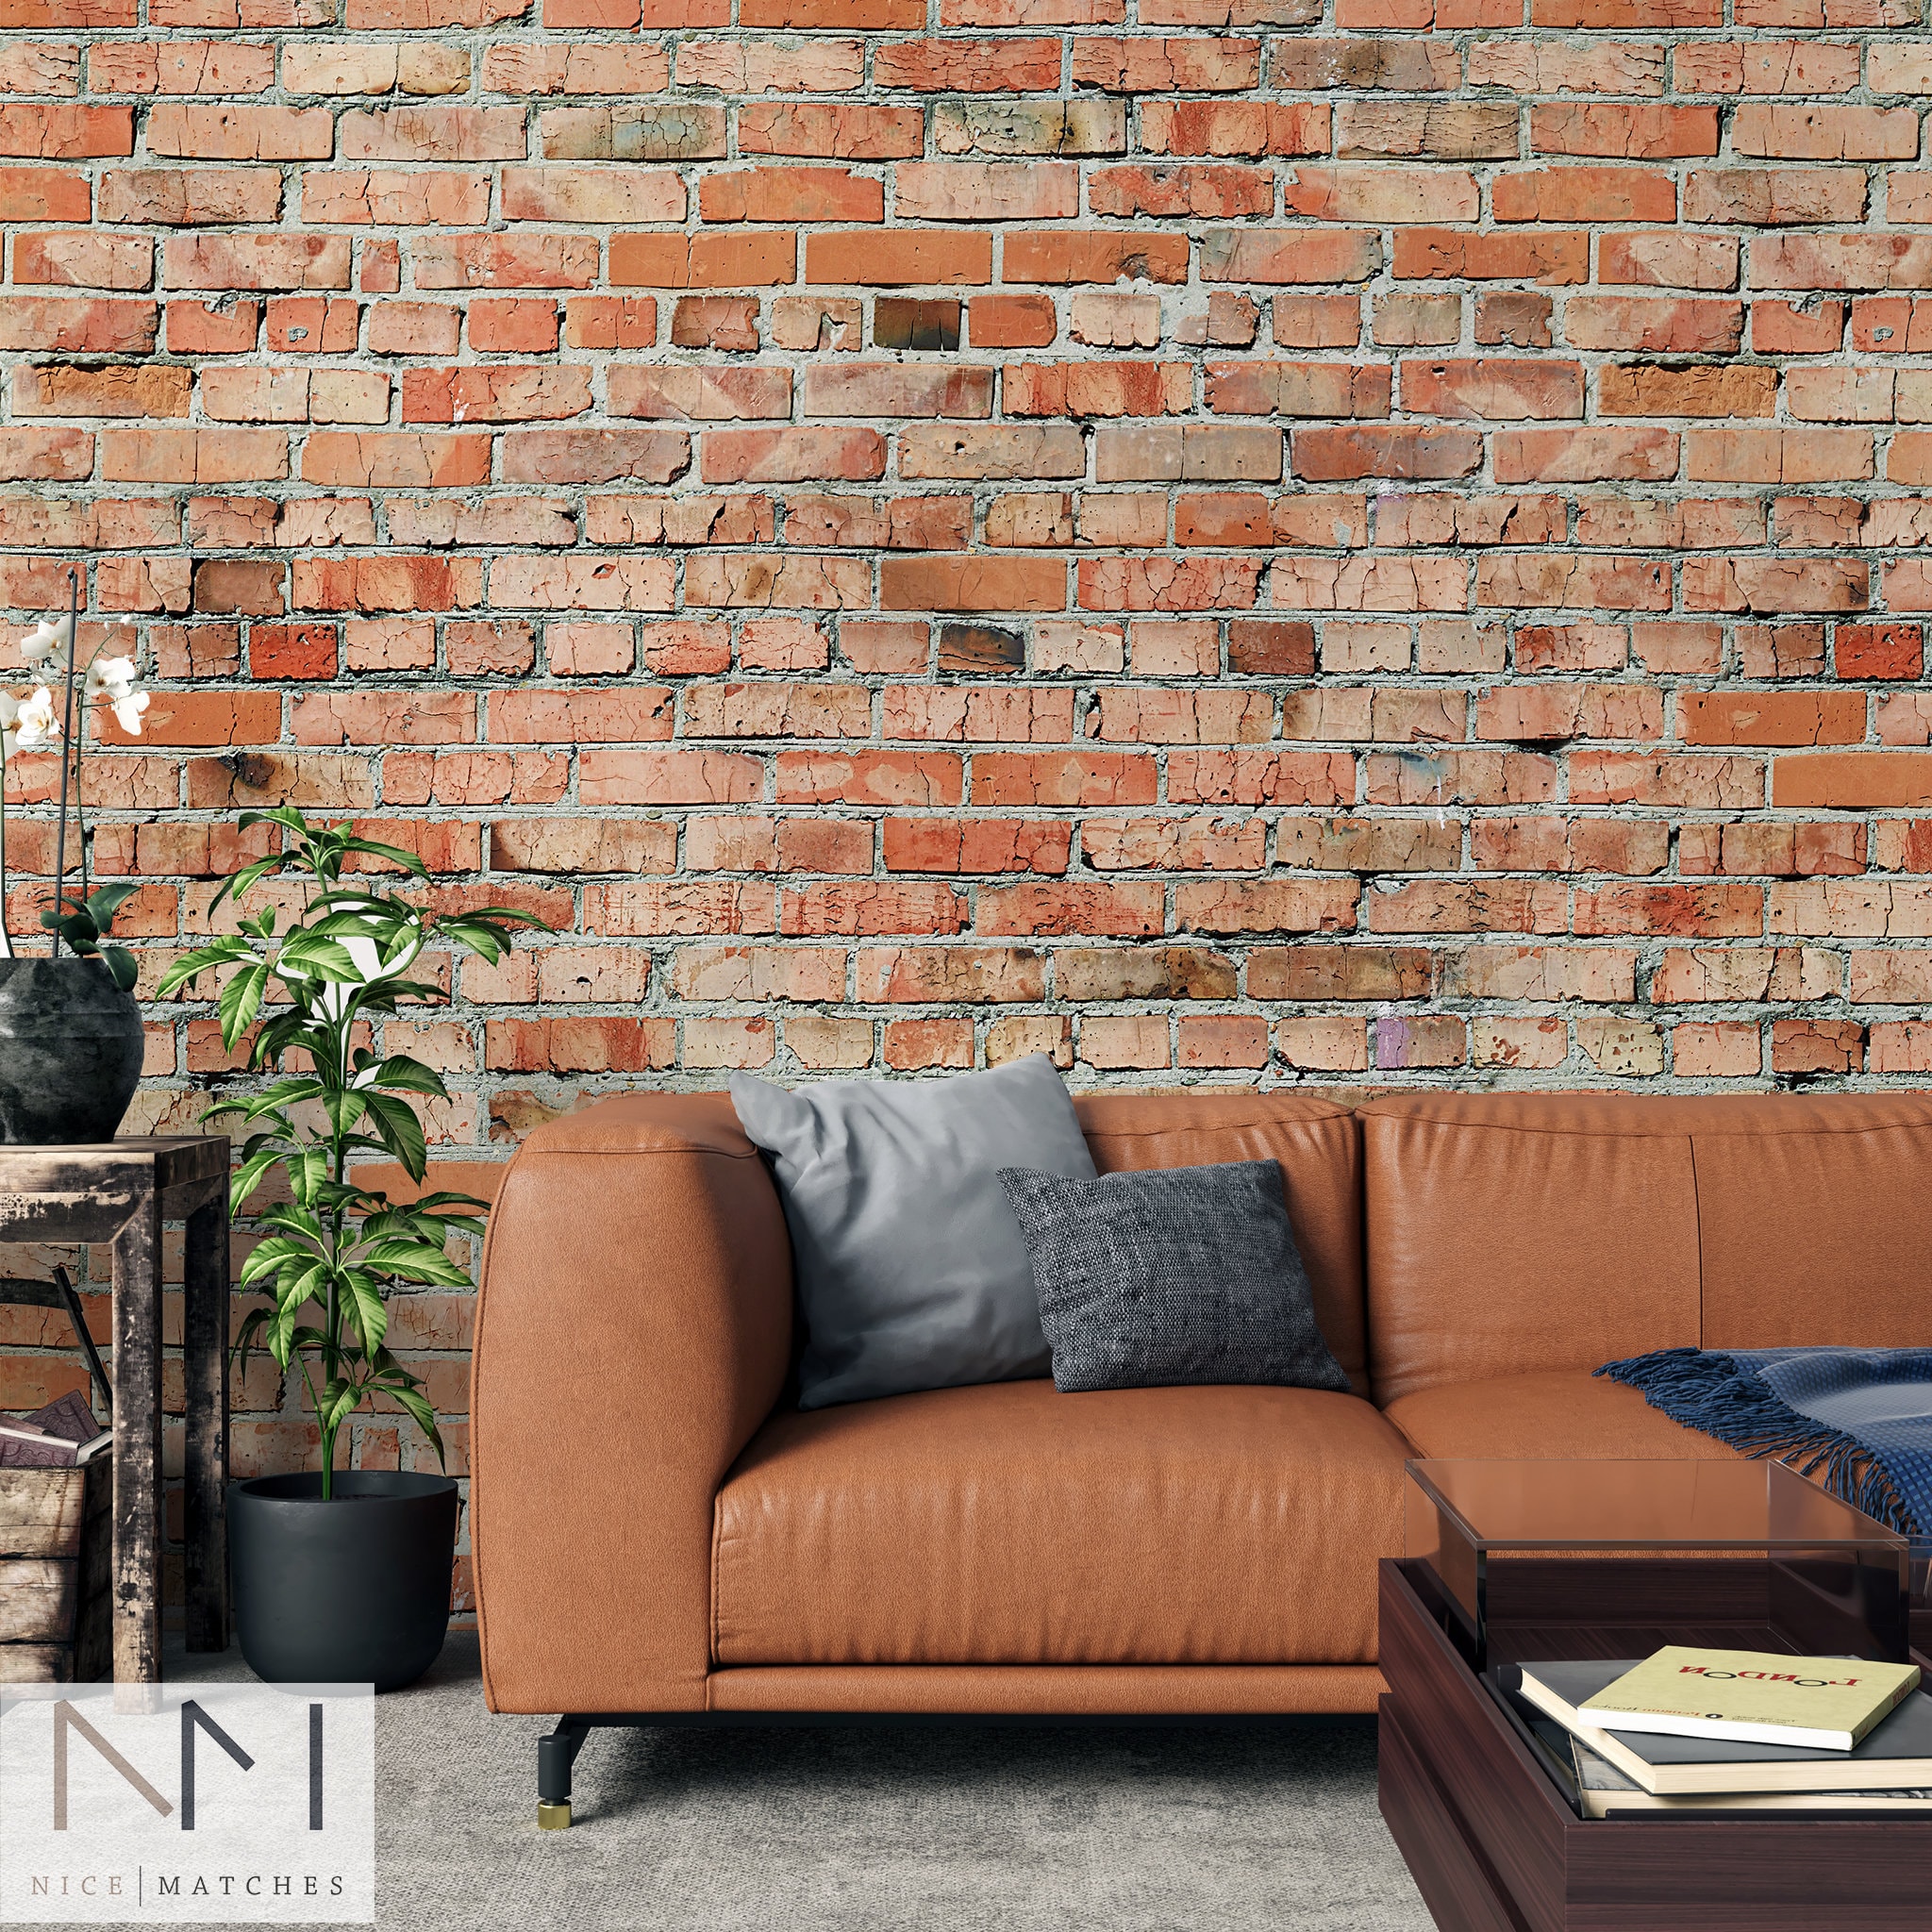 Plain Faux Brick Wall Decal Horizontal Panel Mural Peel & Stick Graphic  Removable Wallpaper DIY Home Decor Industrial Style 24 X 48 Inches 